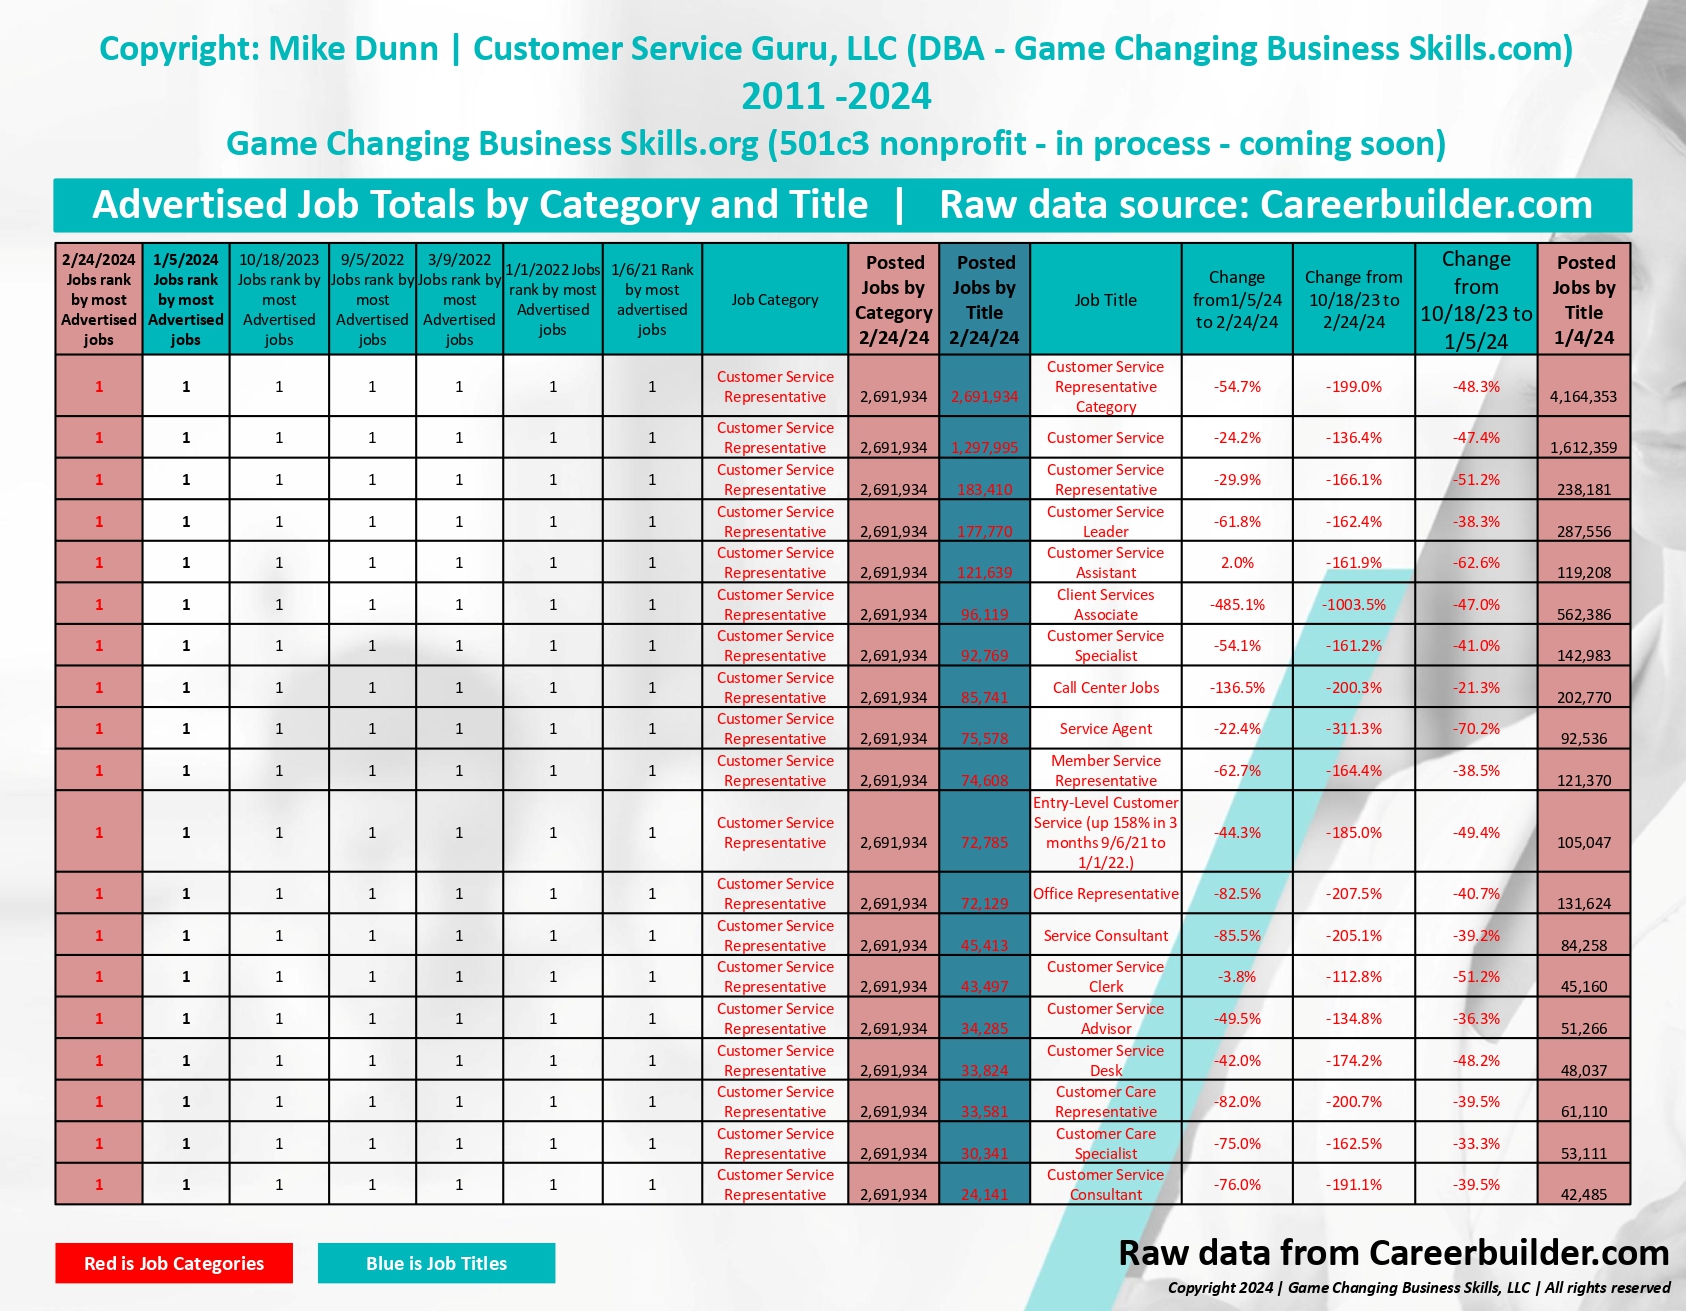 List of customer service jobs by title as of 02/24/24